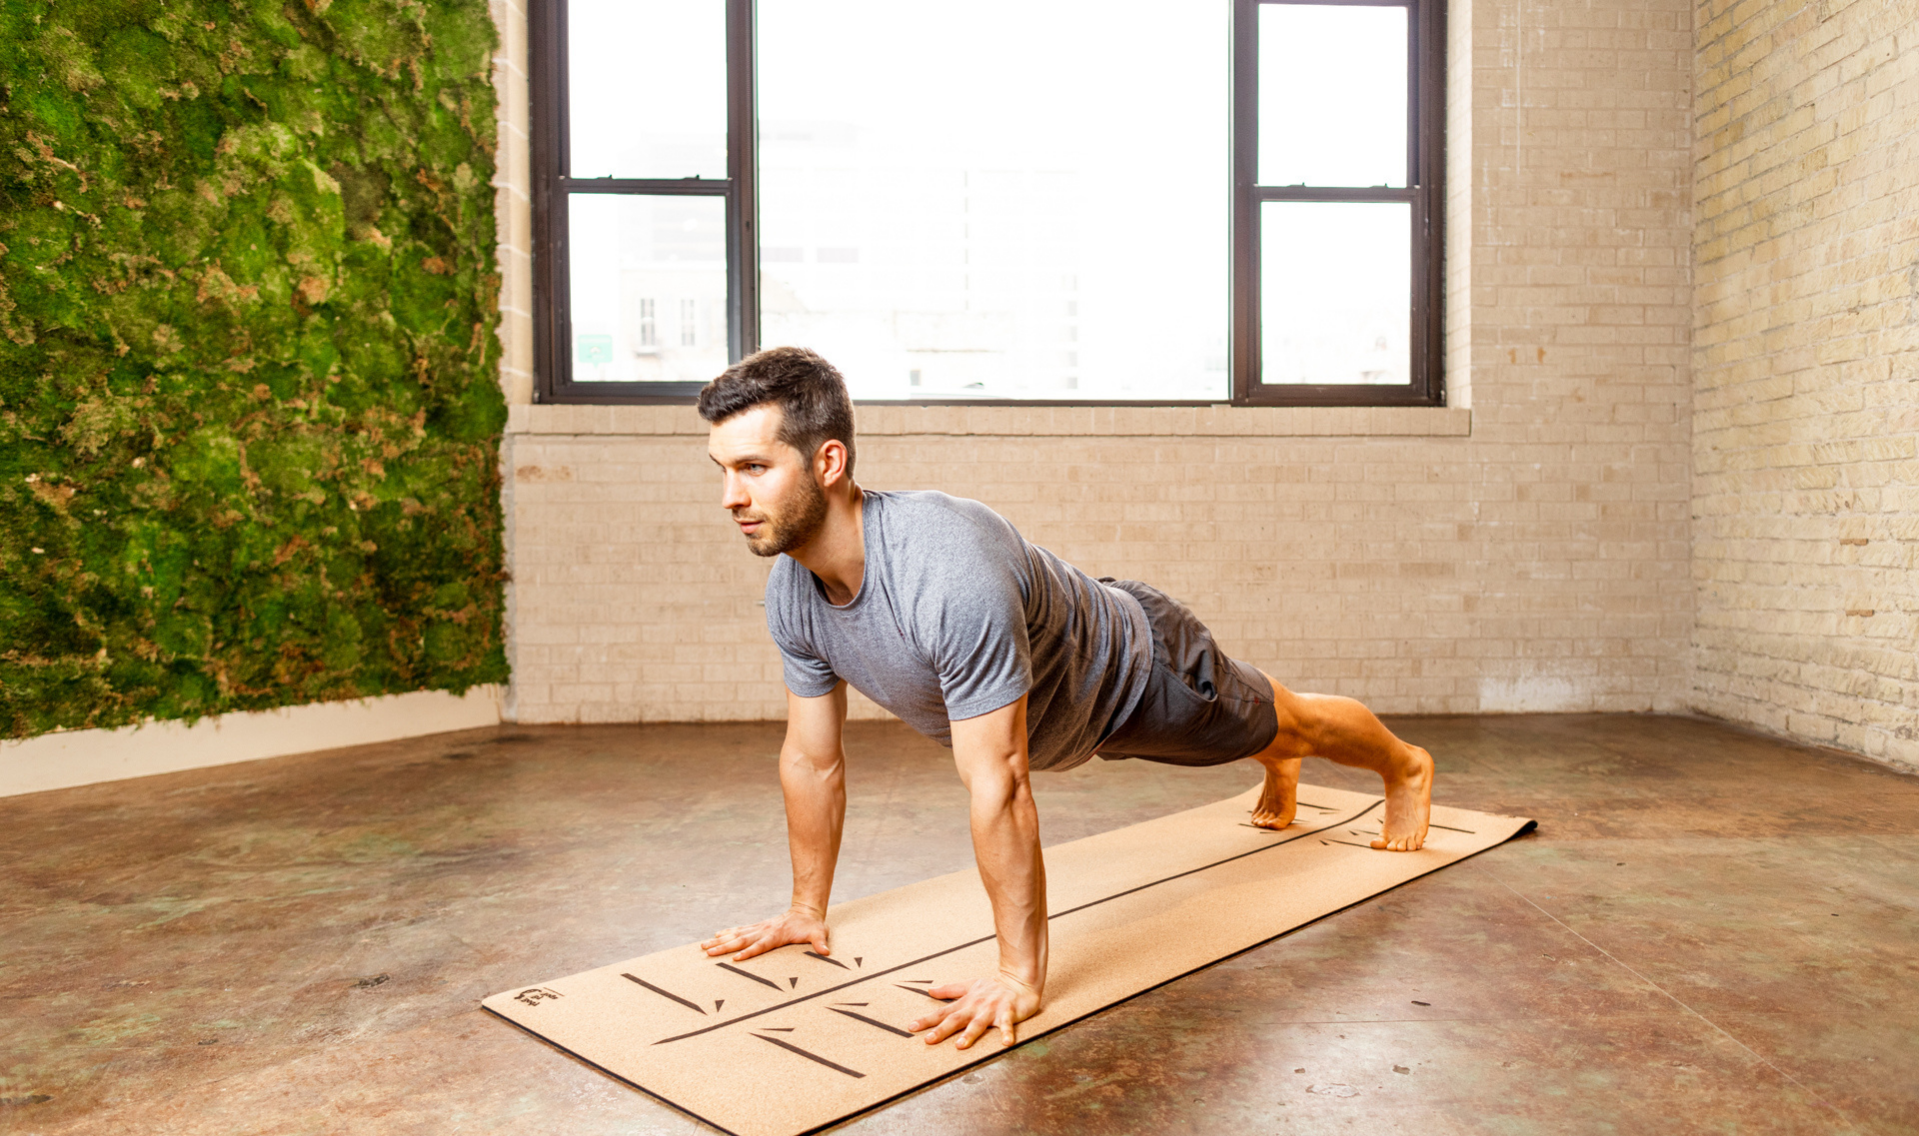 Top 7 Benefits of Cork Yoga Mats (AVOID These)